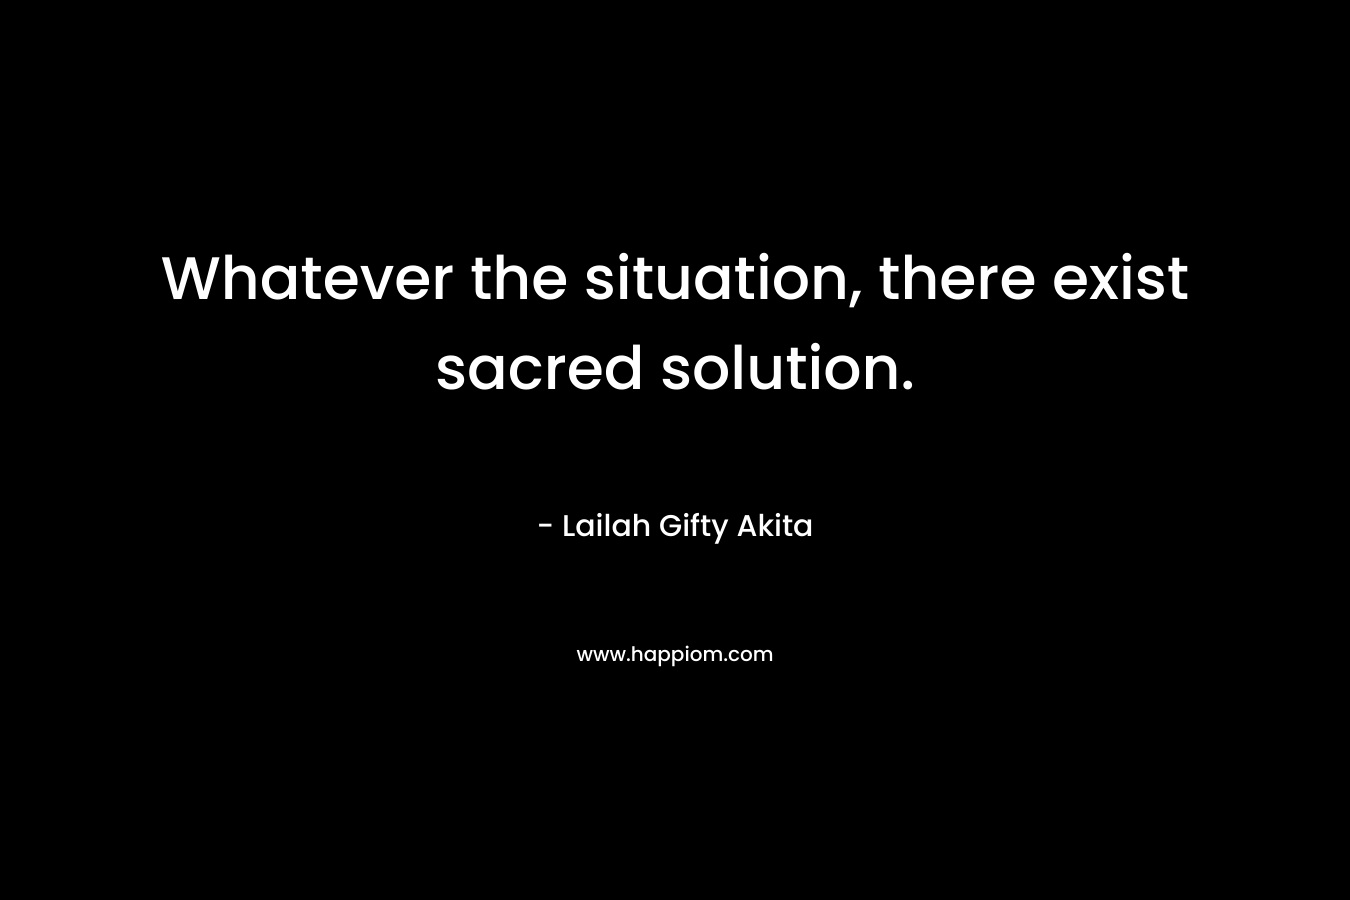 Whatever the situation, there exist sacred solution.